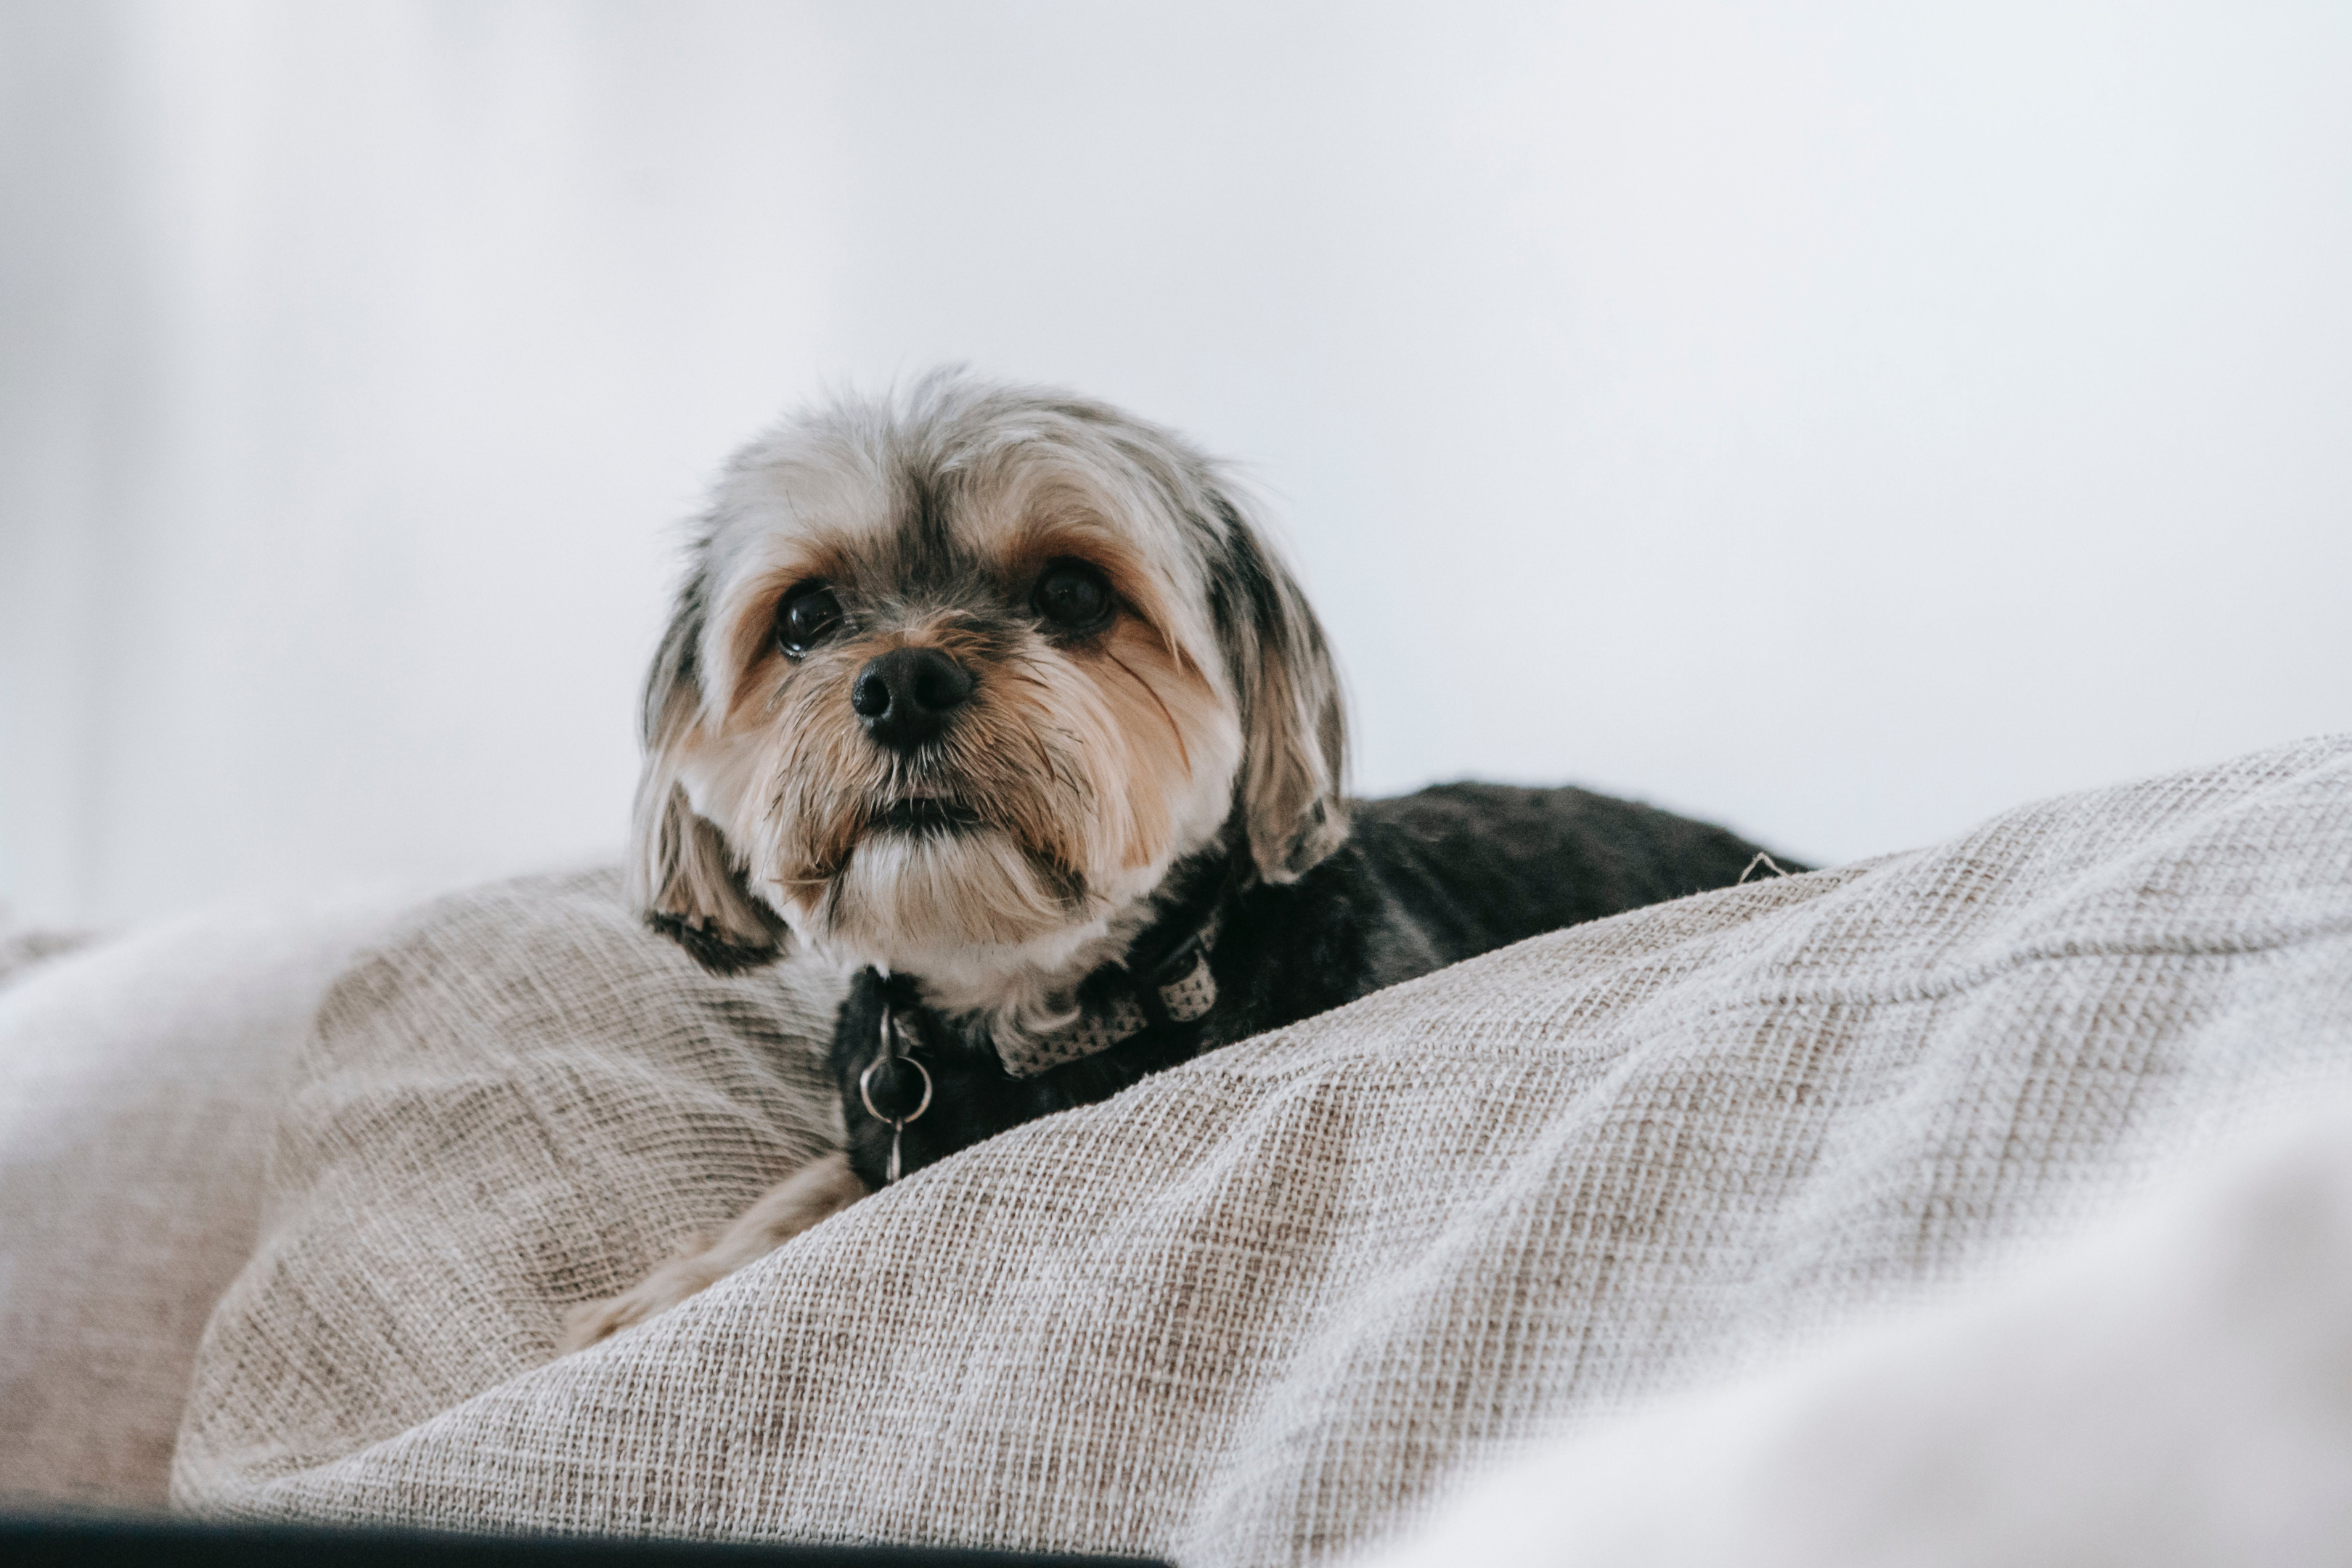 These tips will help keep dental health issues in senior Yorkies at bay.